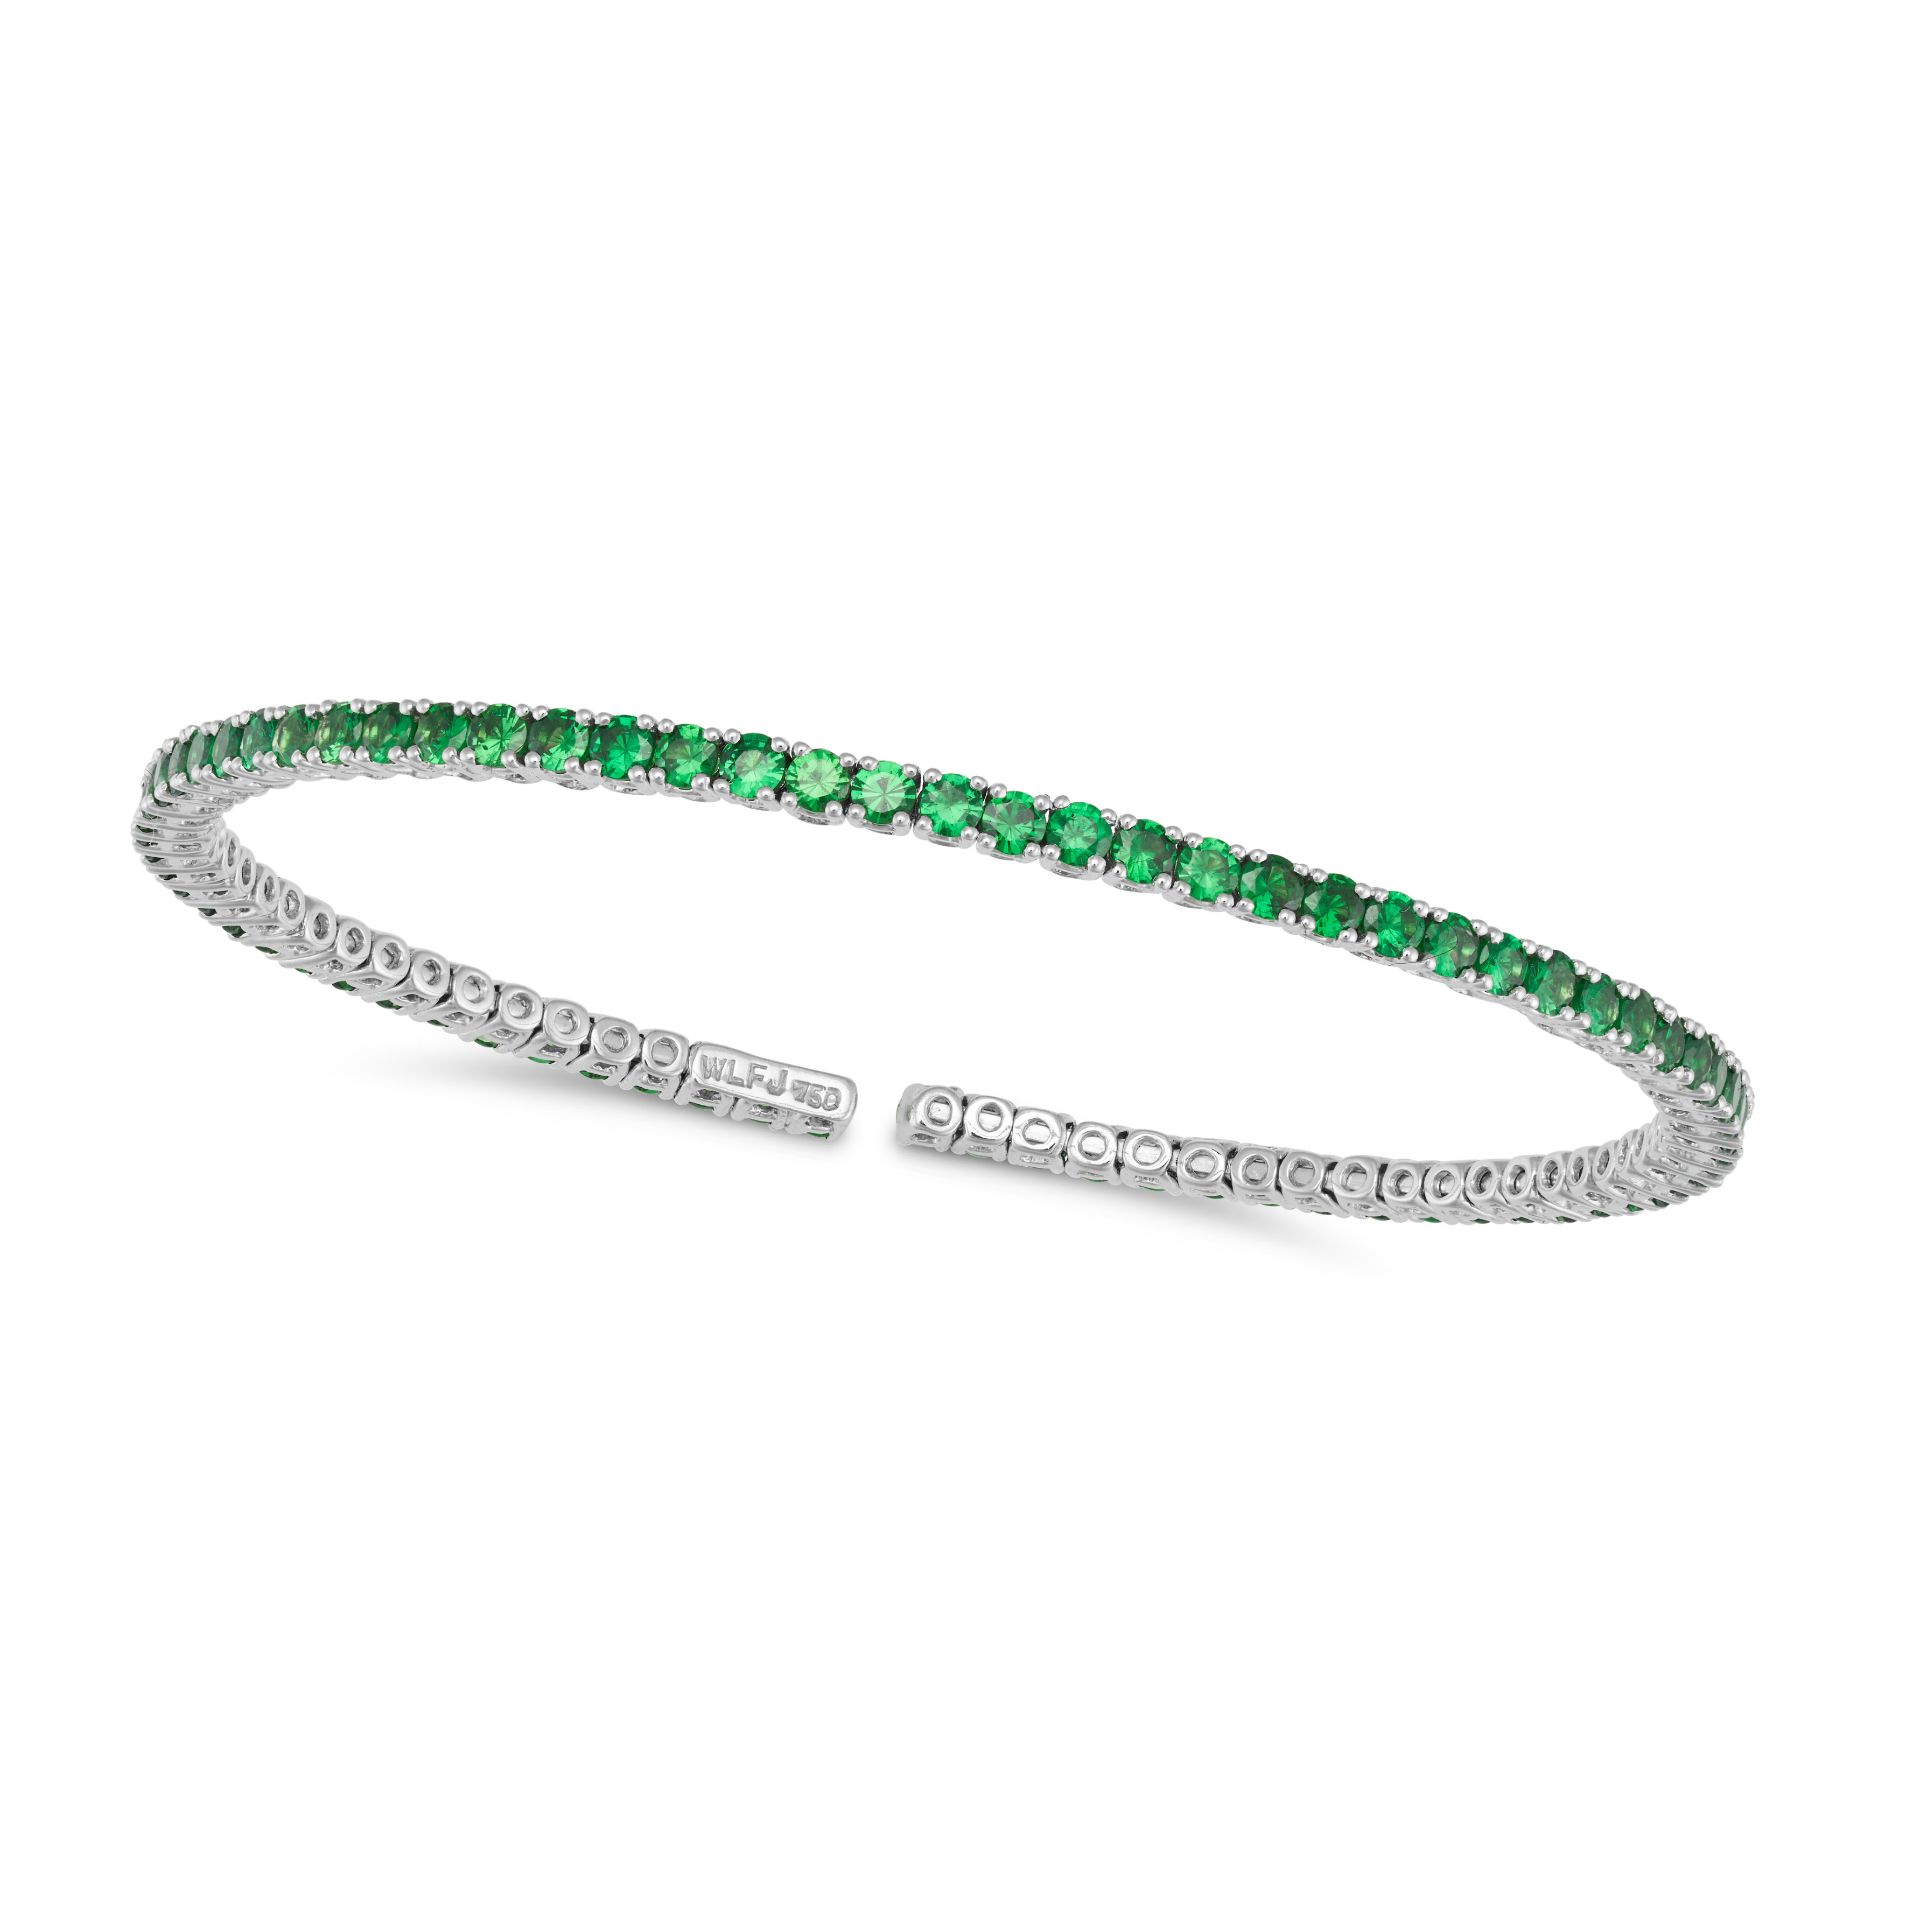 A TSAVORITE GARNET BANGLE in 18ct white gold, the open bracelet set with a row of round cut tsavo...